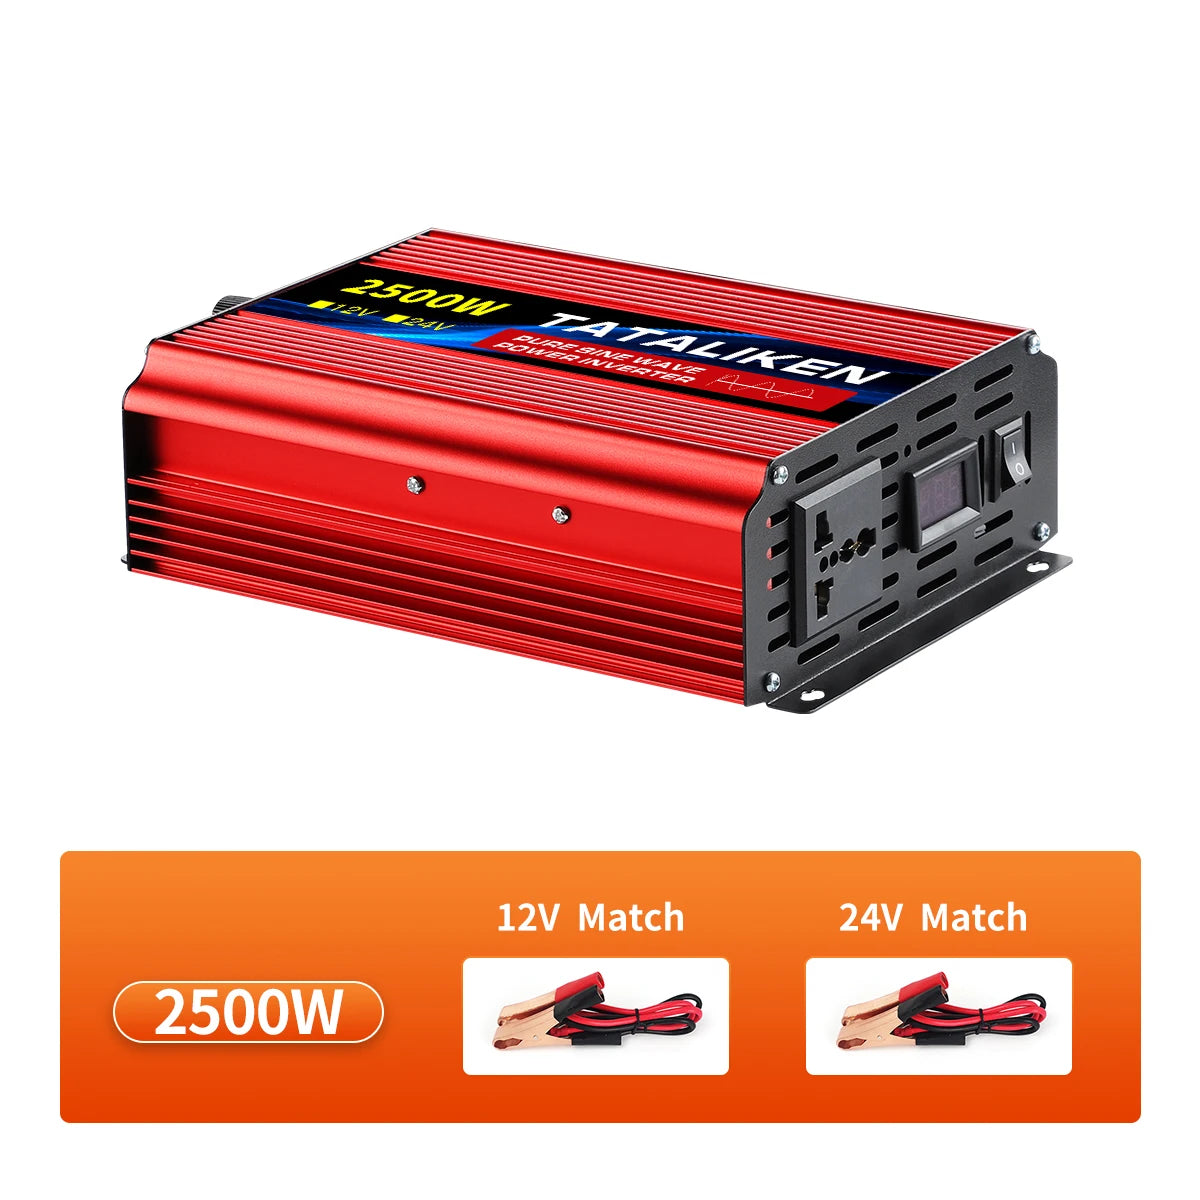 DC/AC Inverter, single output, powers up to 5000W with adjustable frequency and voltage.